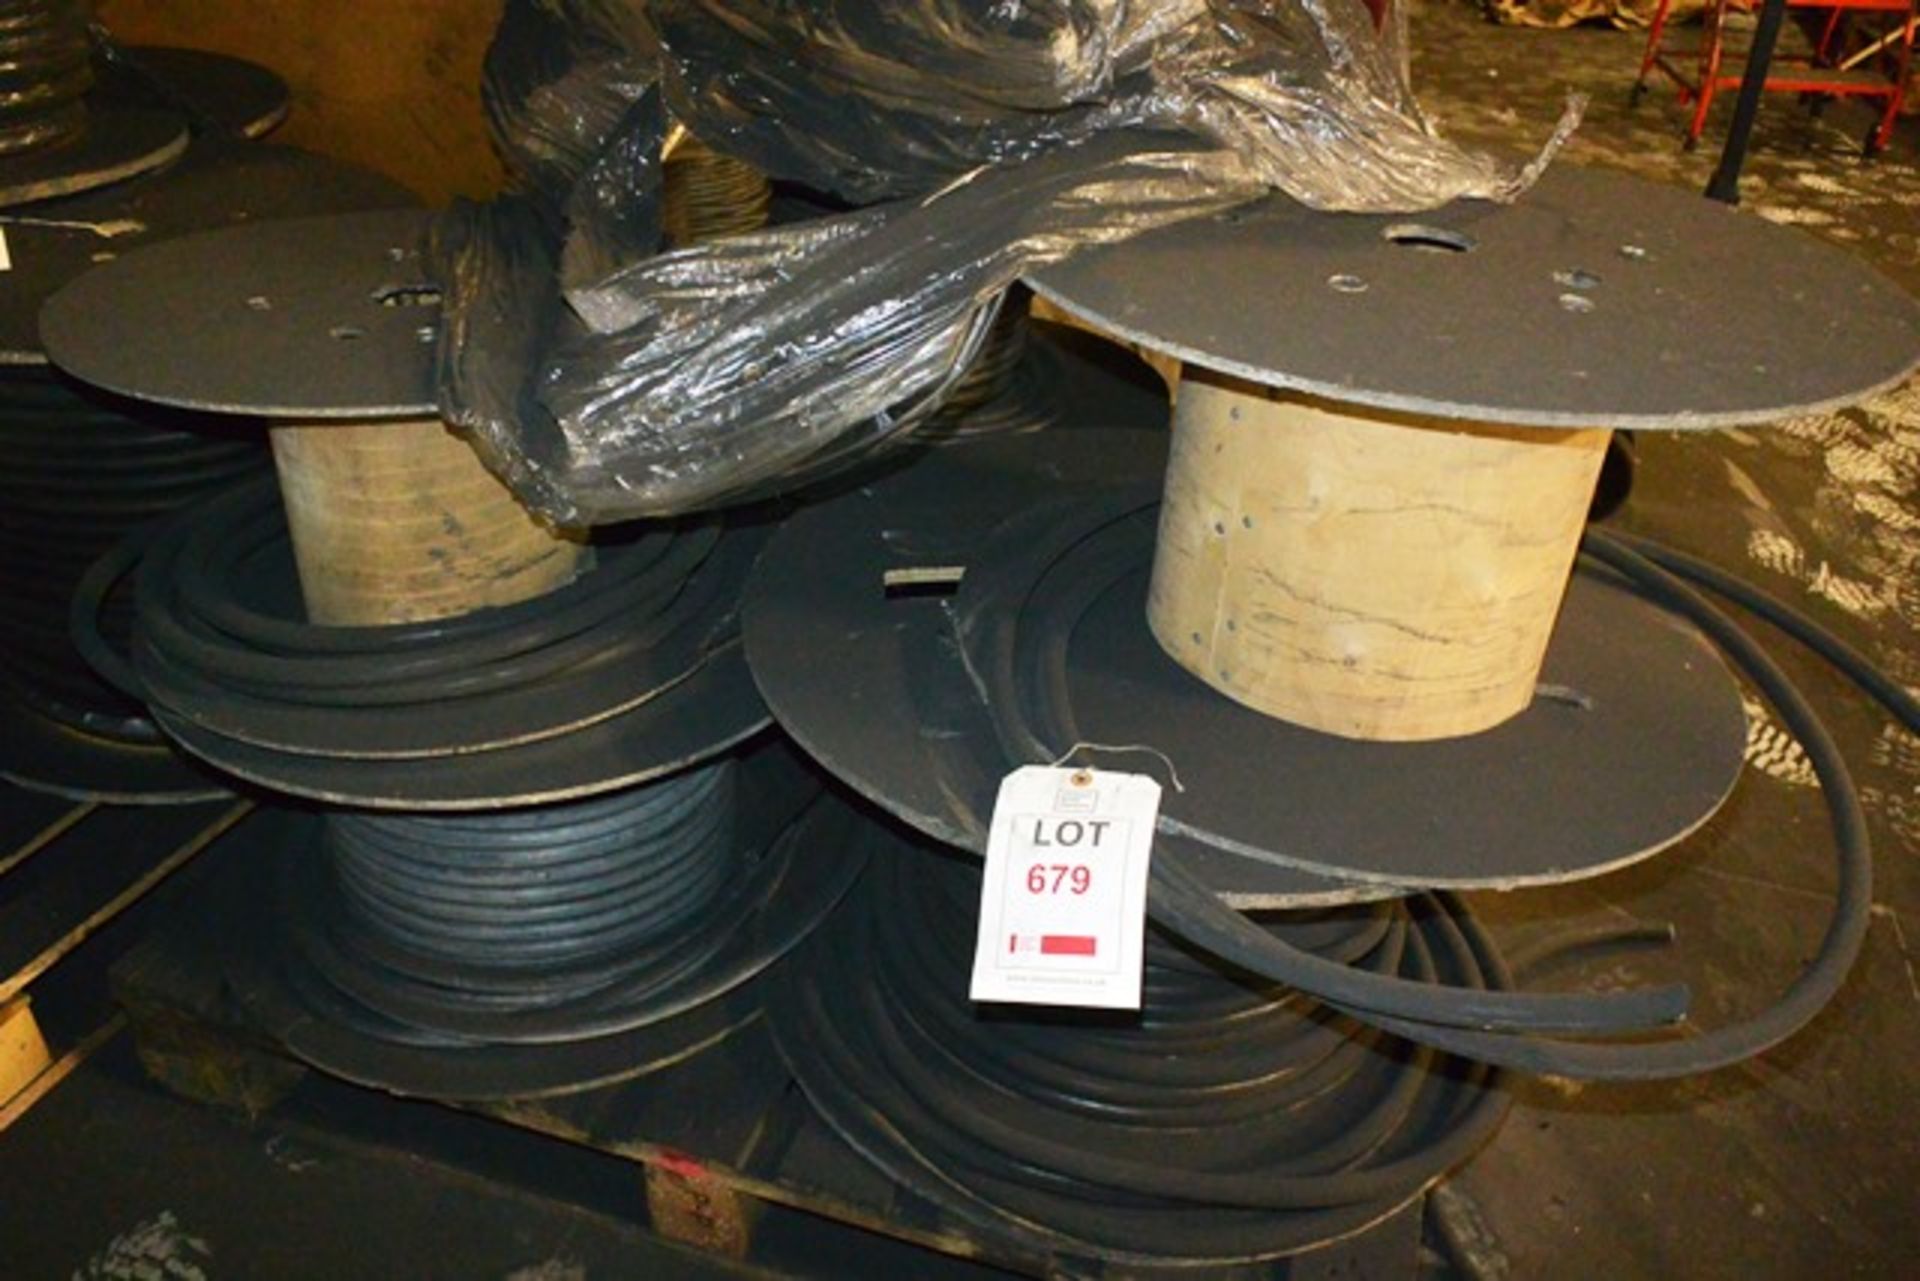 Contents of pallet to incl. approx five various part reels of wire stock